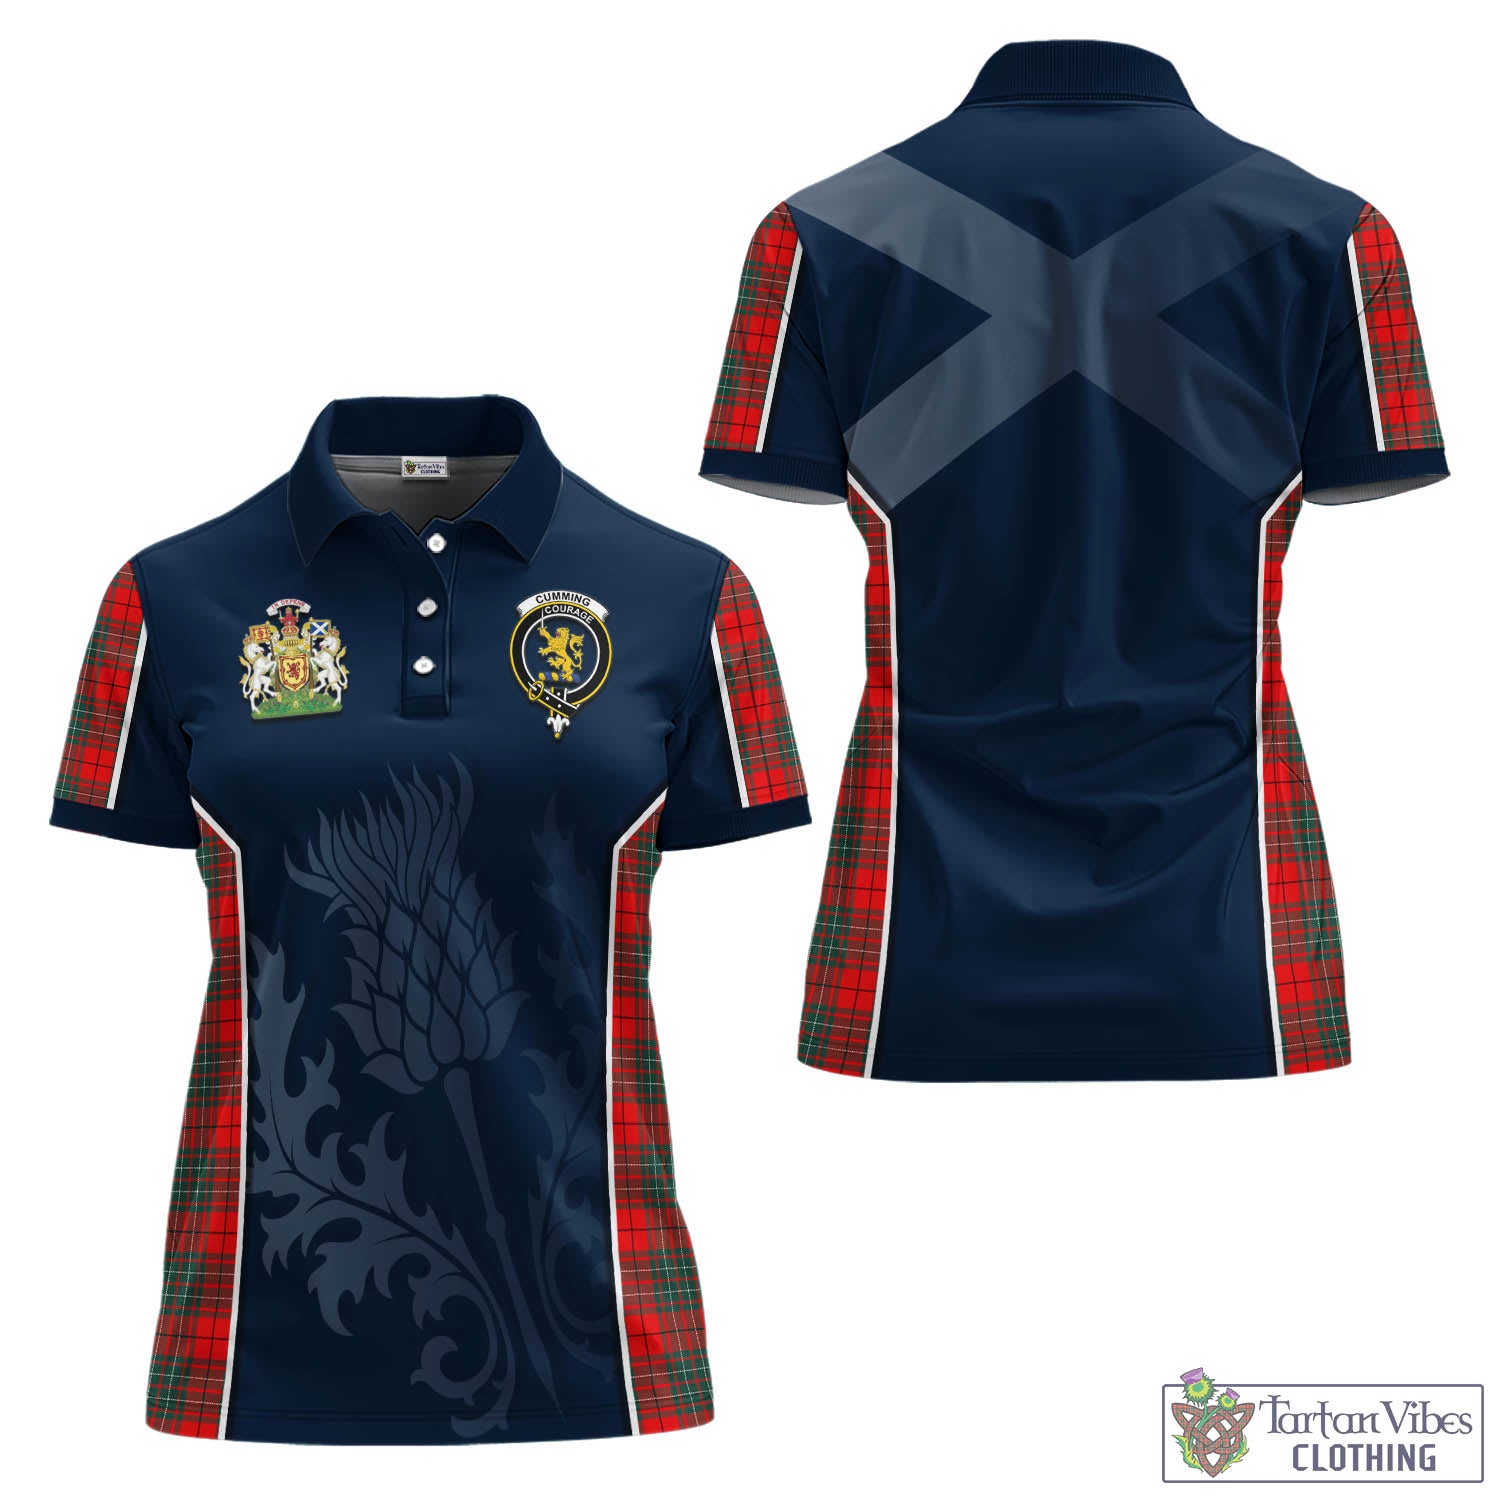 Tartan Vibes Clothing Cumming Modern Tartan Women's Polo Shirt with Family Crest and Scottish Thistle Vibes Sport Style